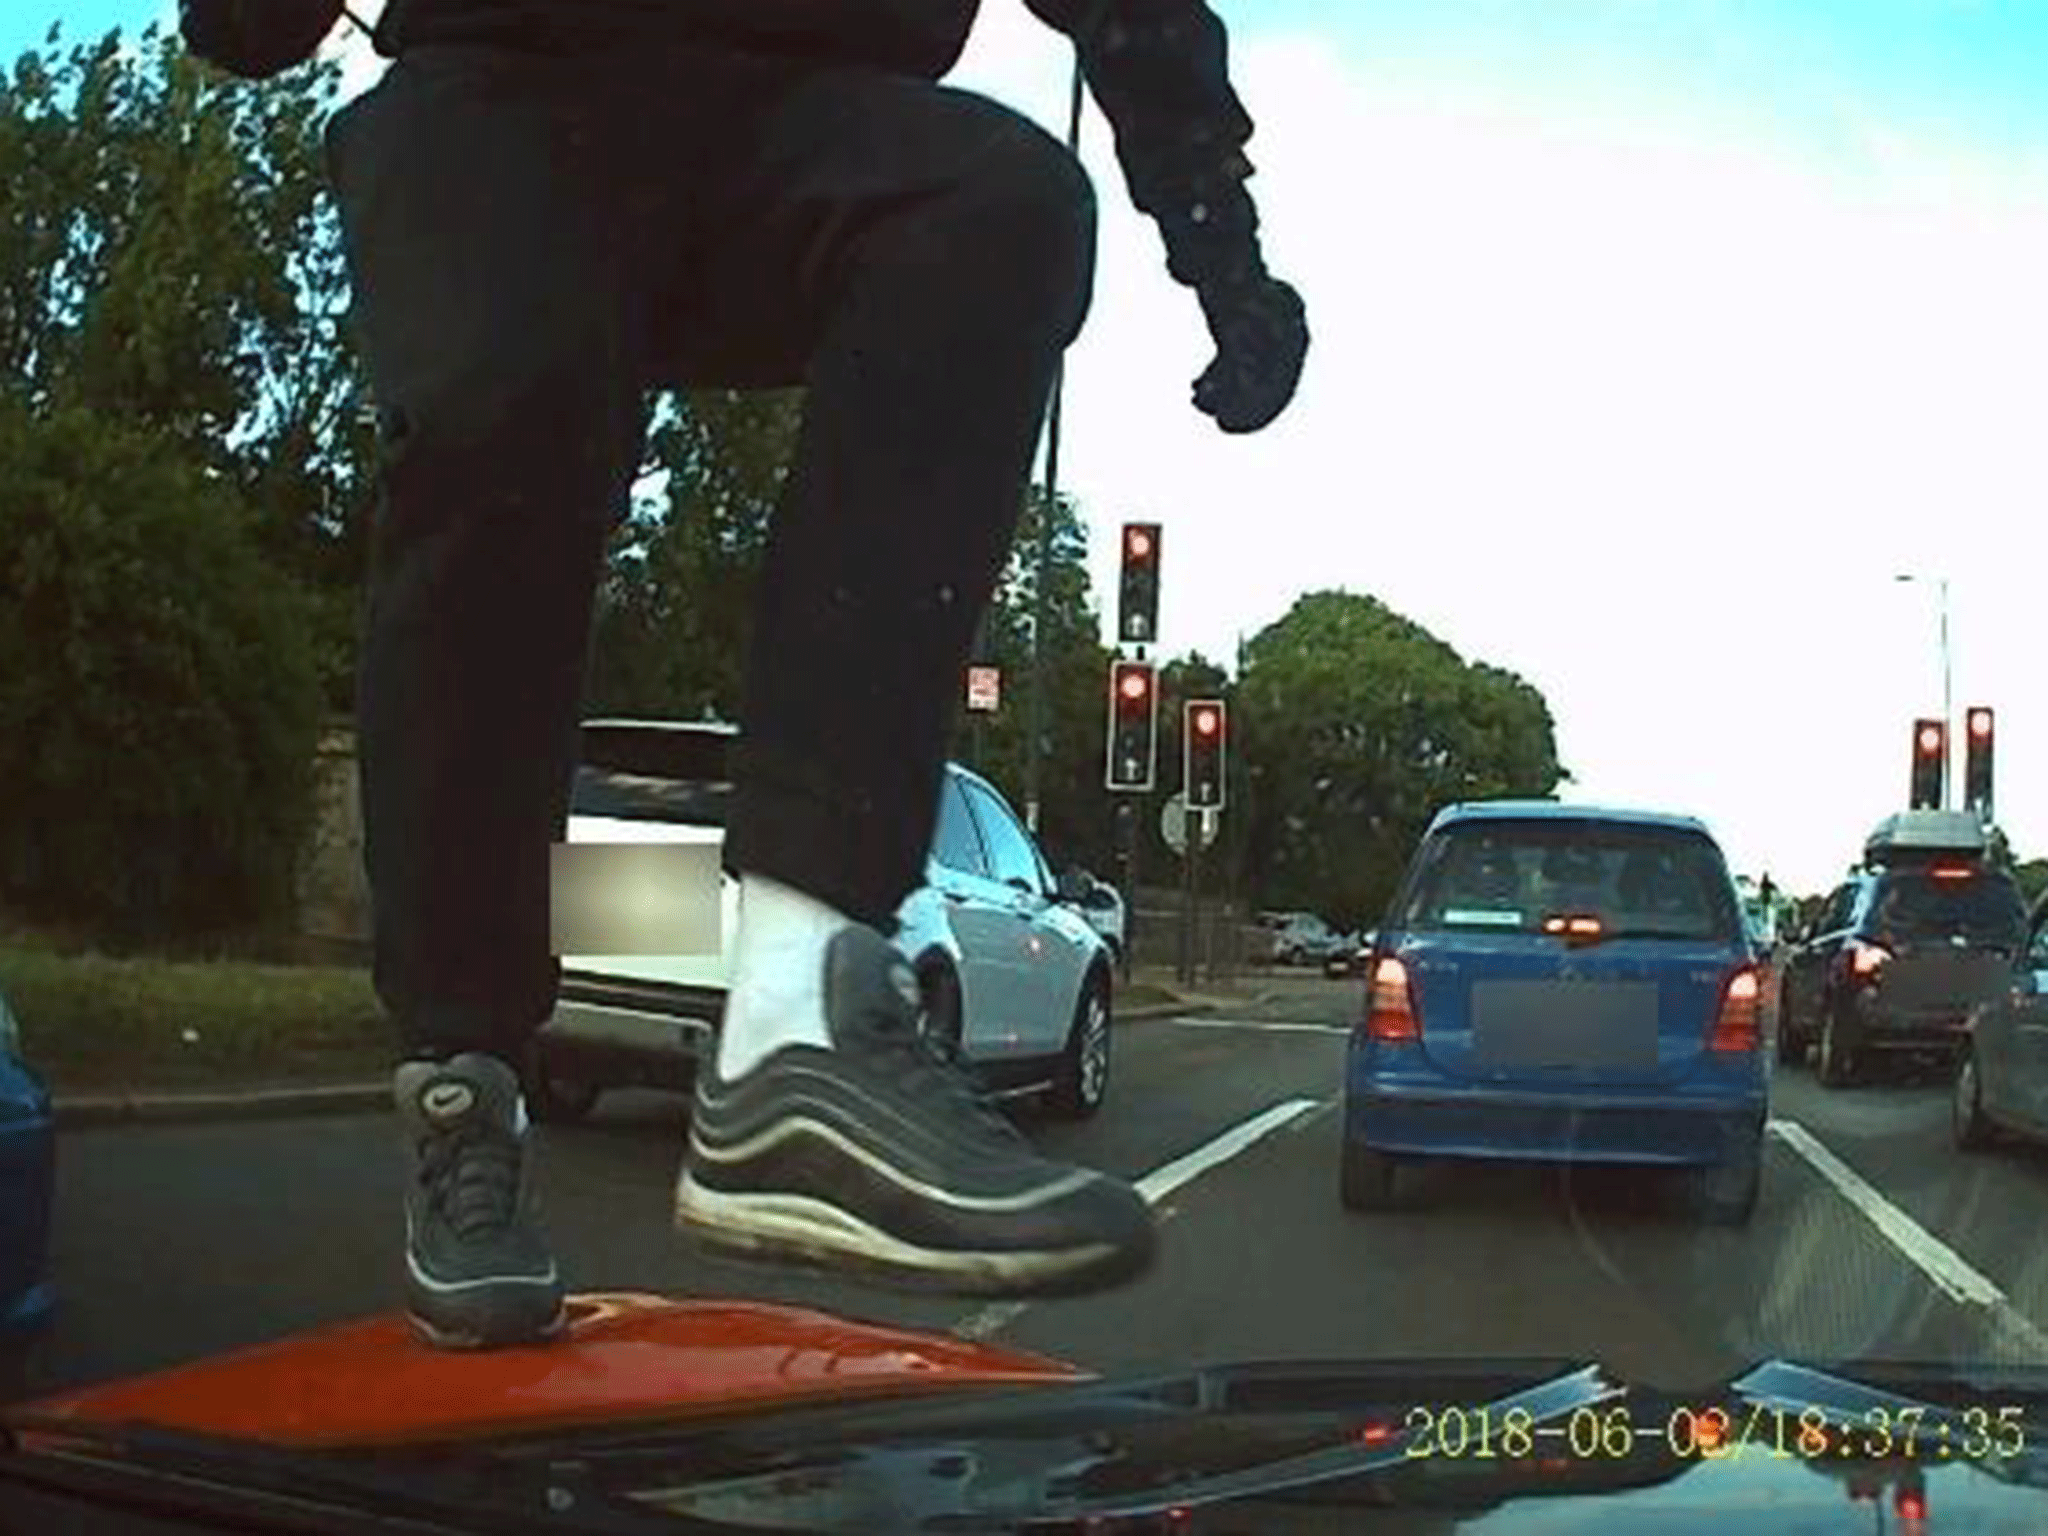 A dashcam image showing an attack by moped robbers on a car in Finchley on Saturday